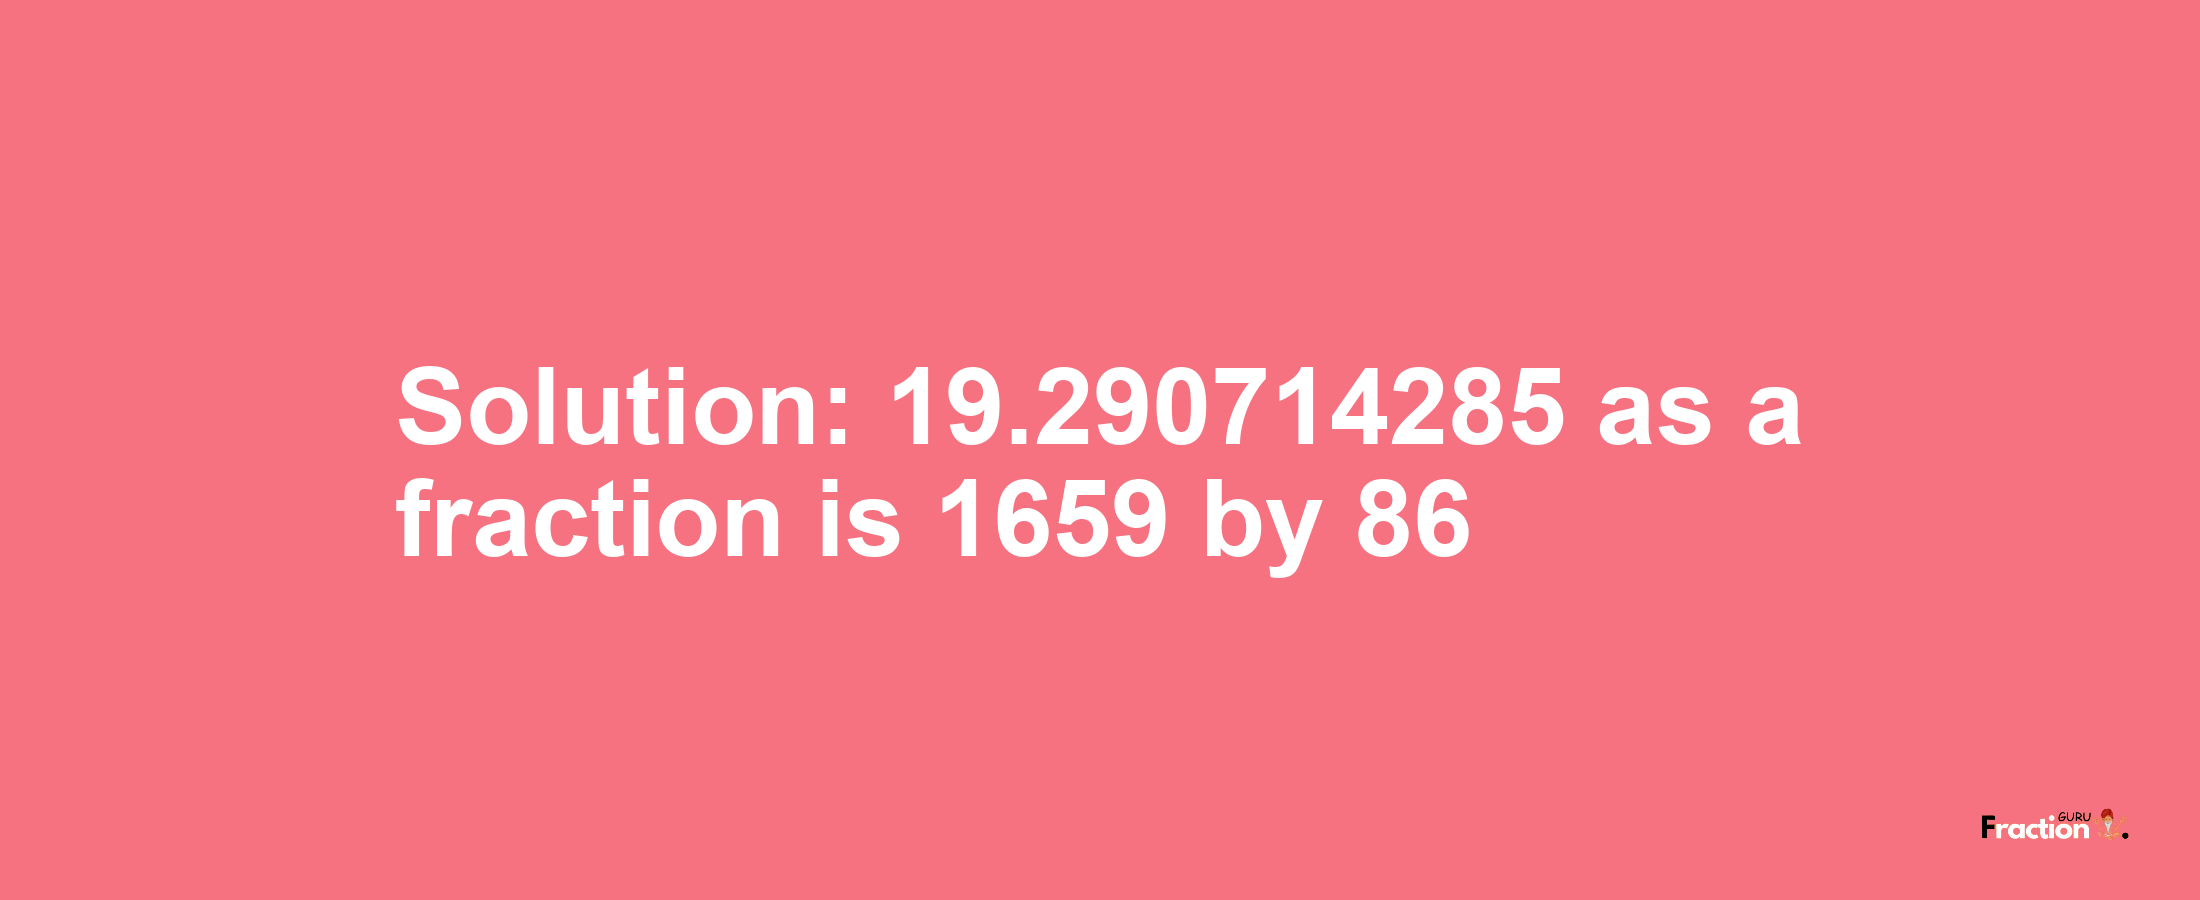 Solution:19.290714285 as a fraction is 1659/86